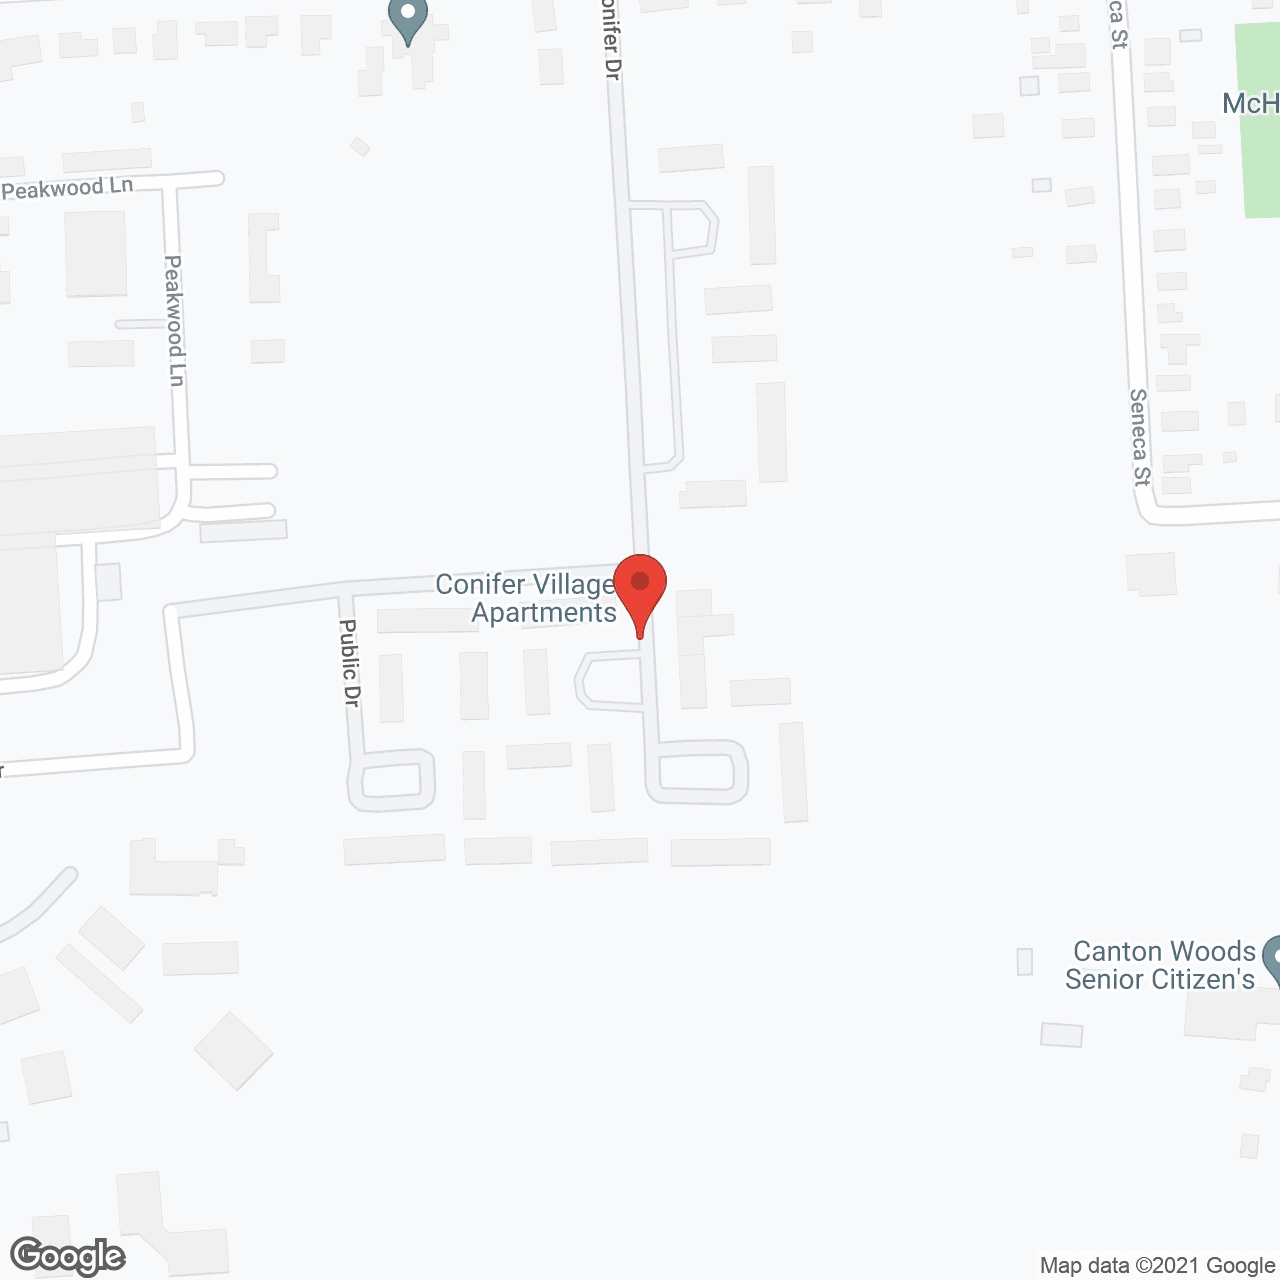 Conifer Village Apartments in google map